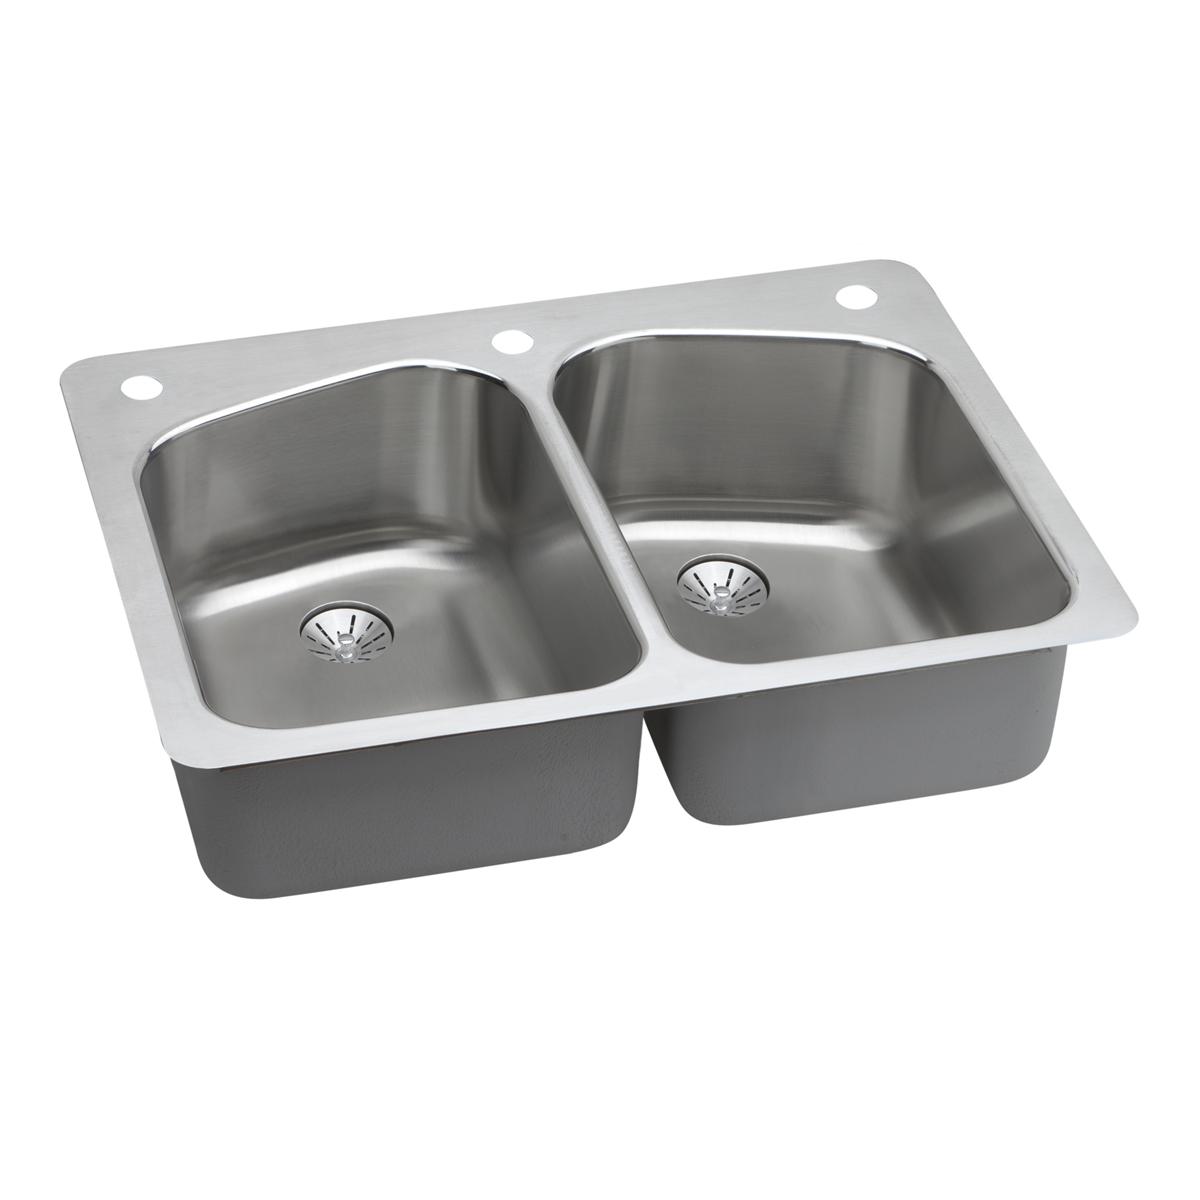 Elkay Lustertone Classic 33" x 22" x 9" Equal Double Bowl Dual Mount Sink with Perfect Drain